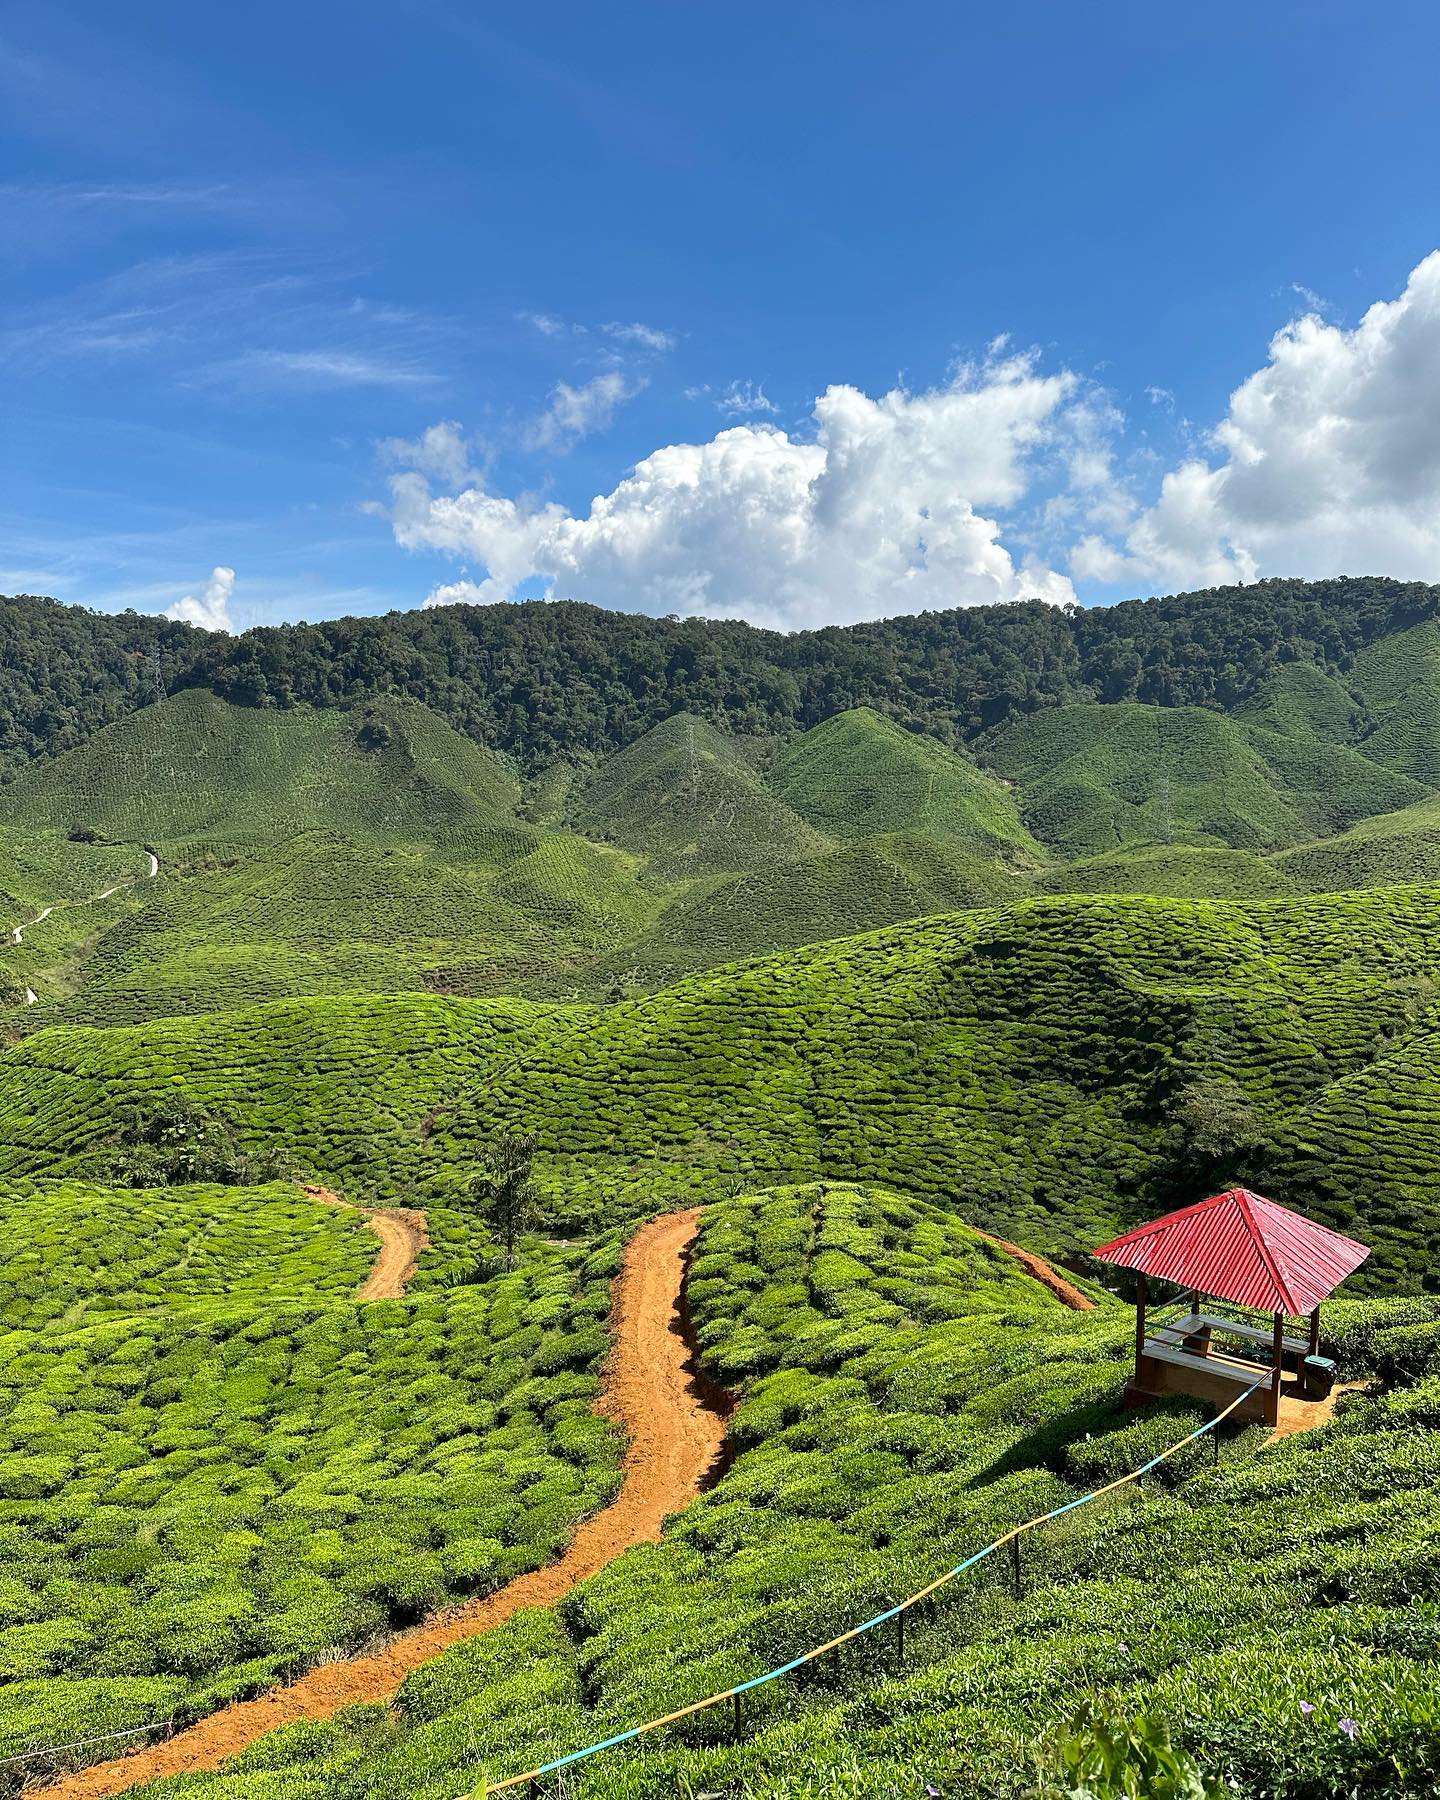 Singapore to Cameron Highlands - scenic route